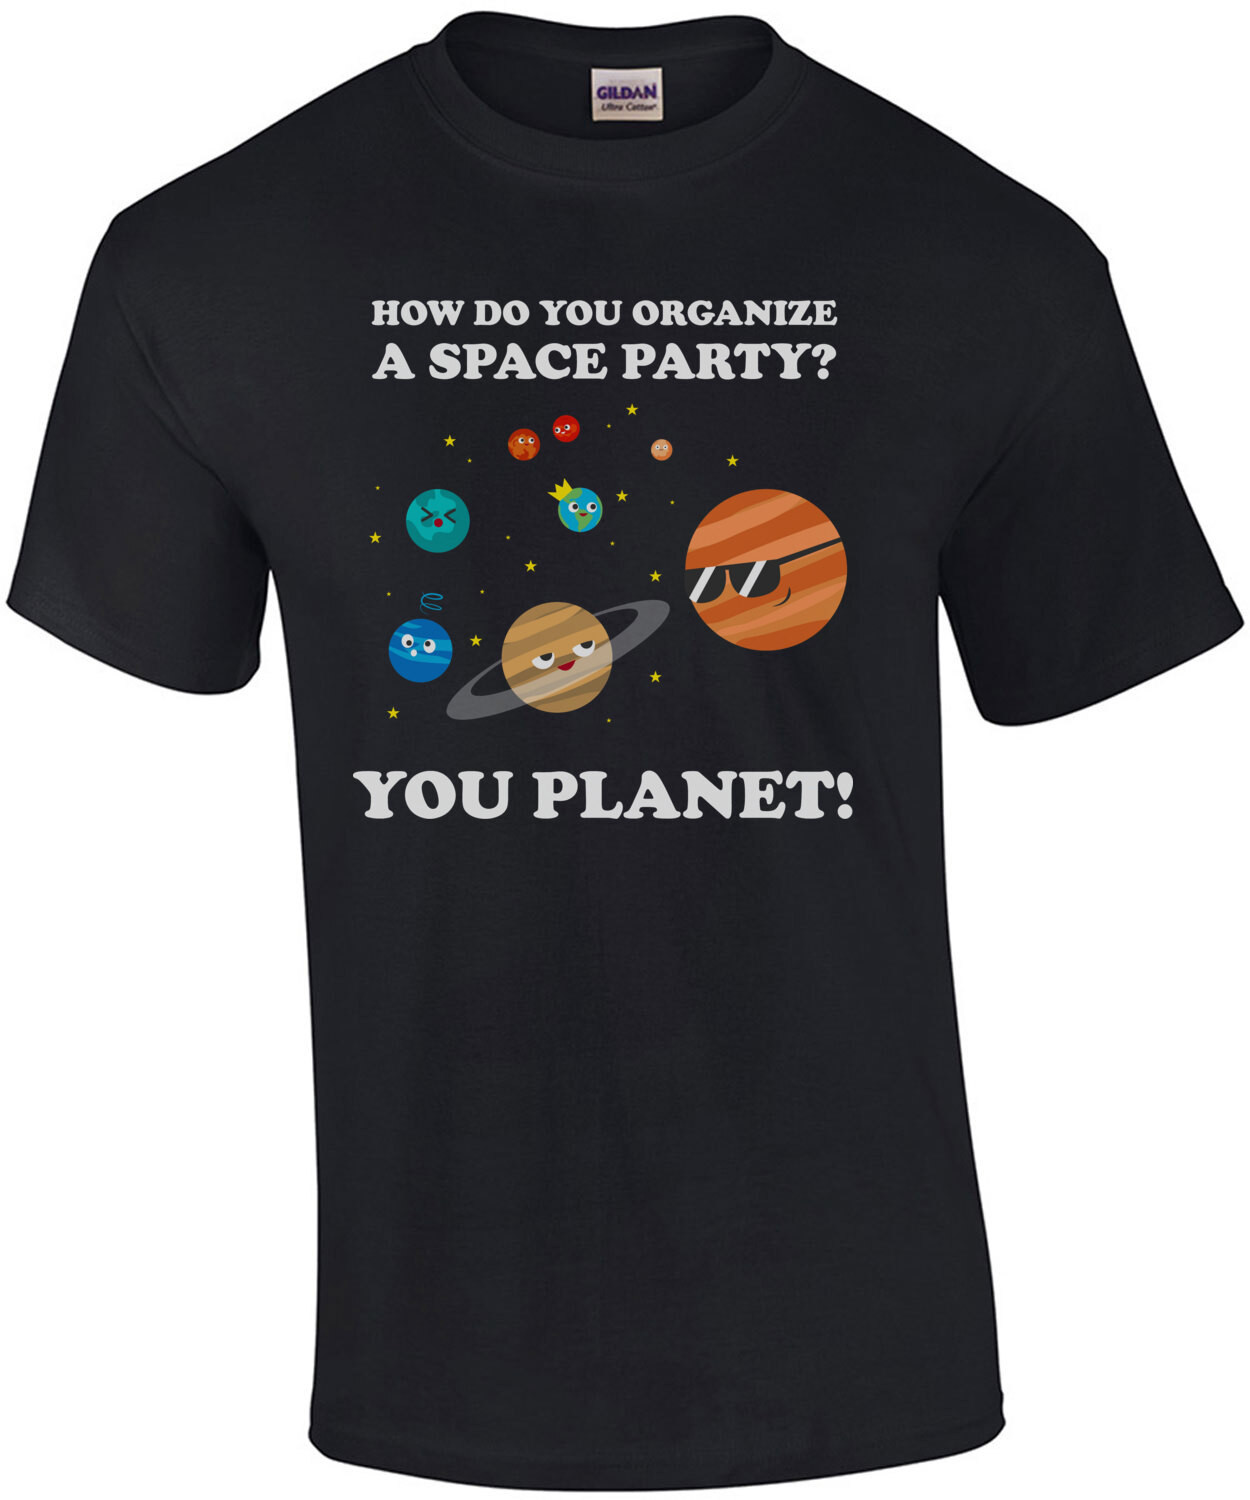 How do you organize a space party? You planet! Funny Pun T-Shirt